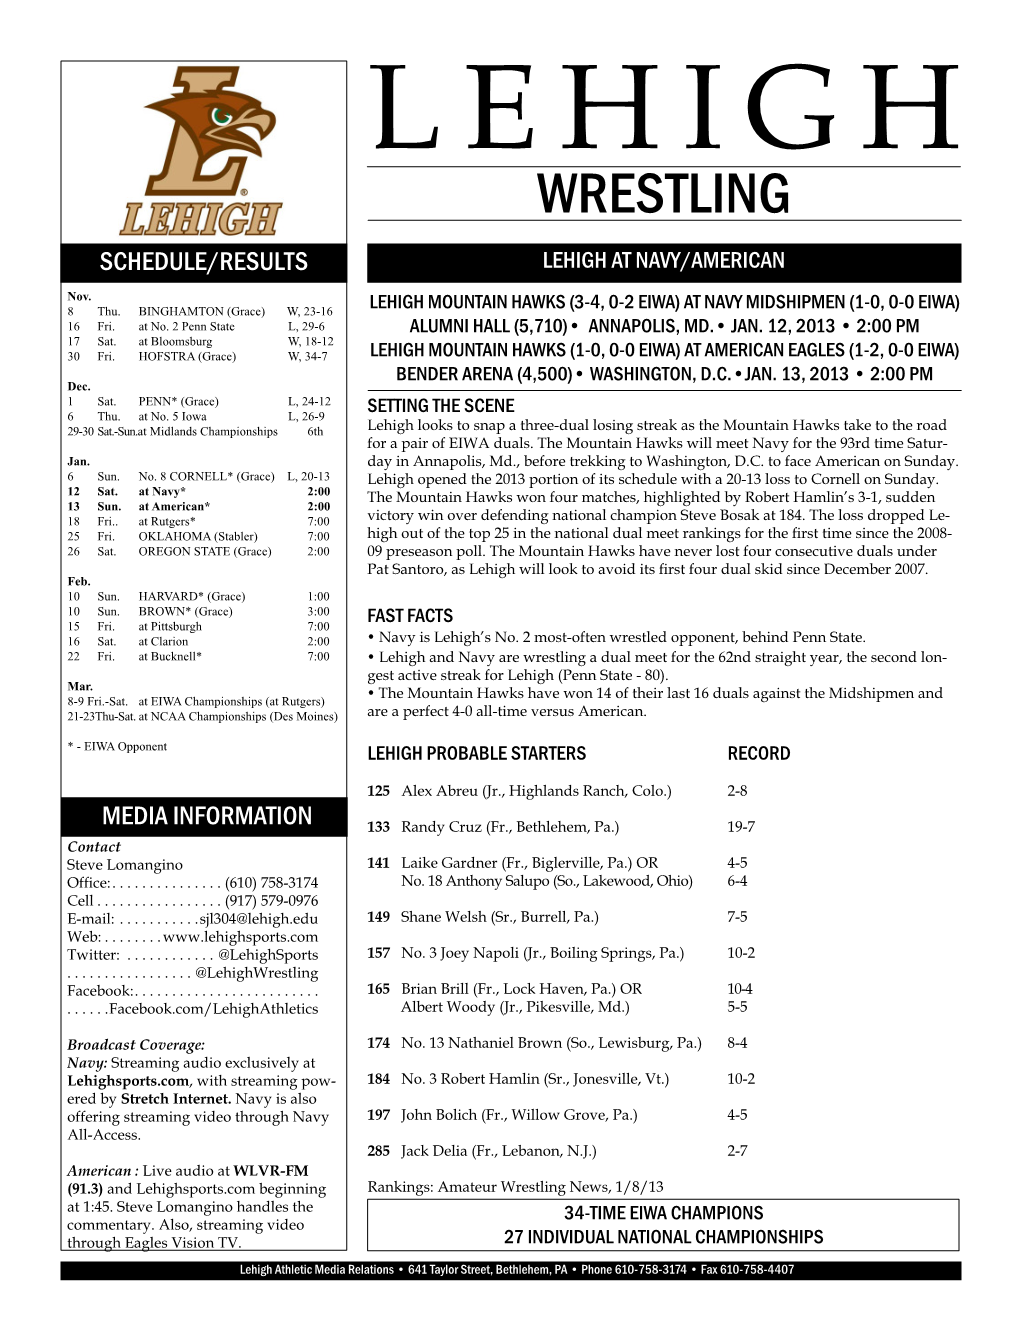 Wrestling Schedule/Results Lehigh at Navy/American